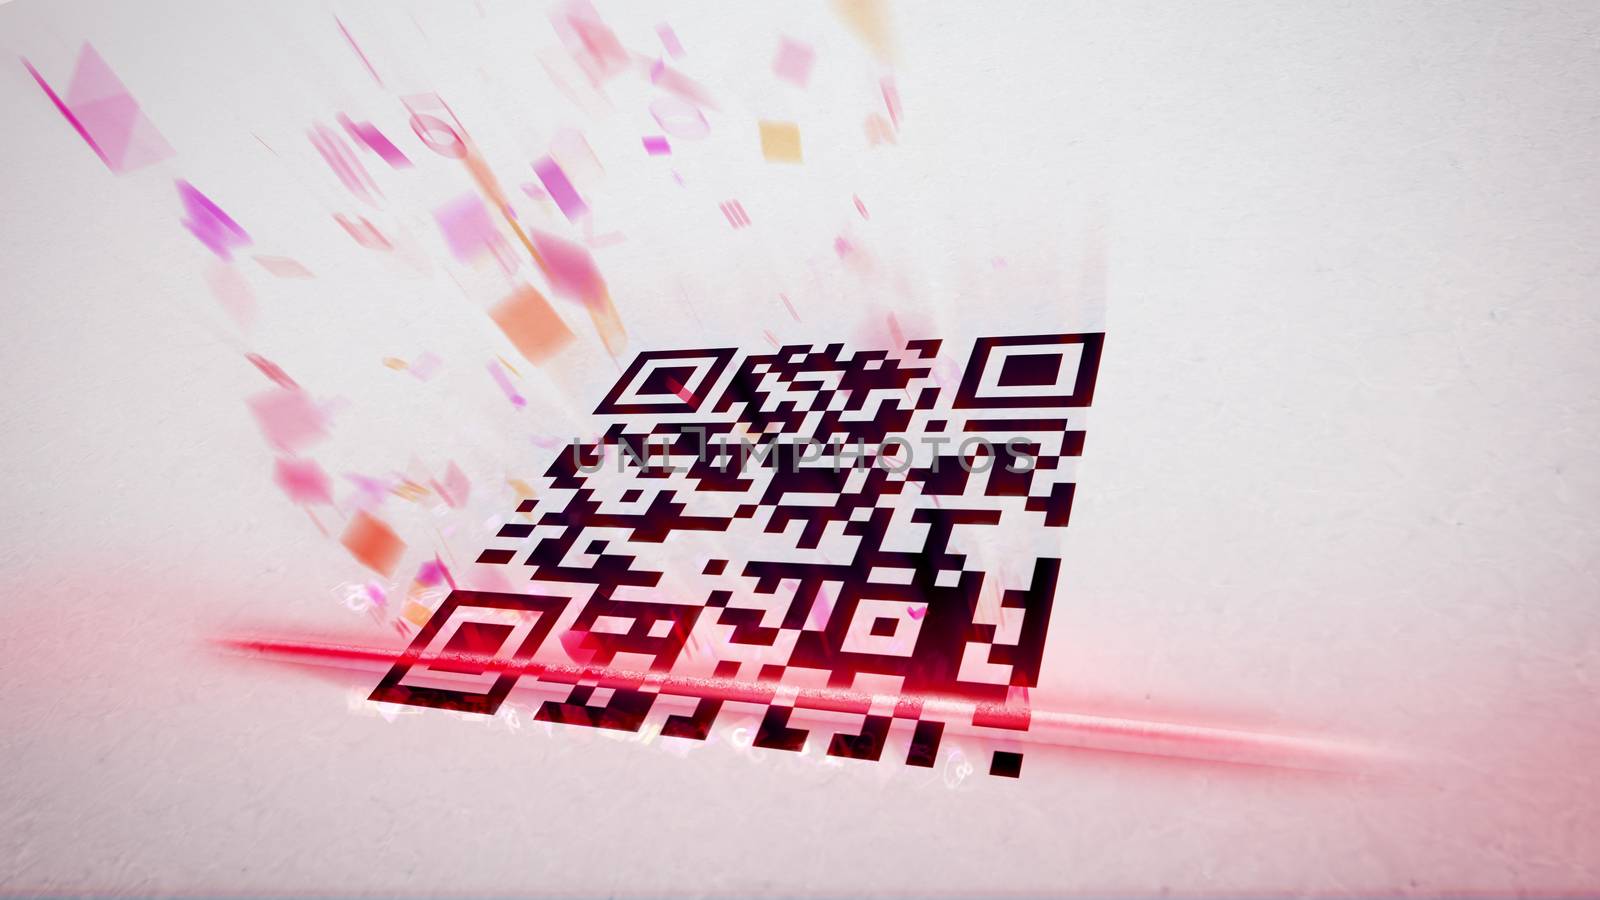 Original 3d rendering of an abstract QR code scanning illustration put aslant with flying up symbols, numbers, and figures of rosy and red colors. The black and white code is with a red laser line